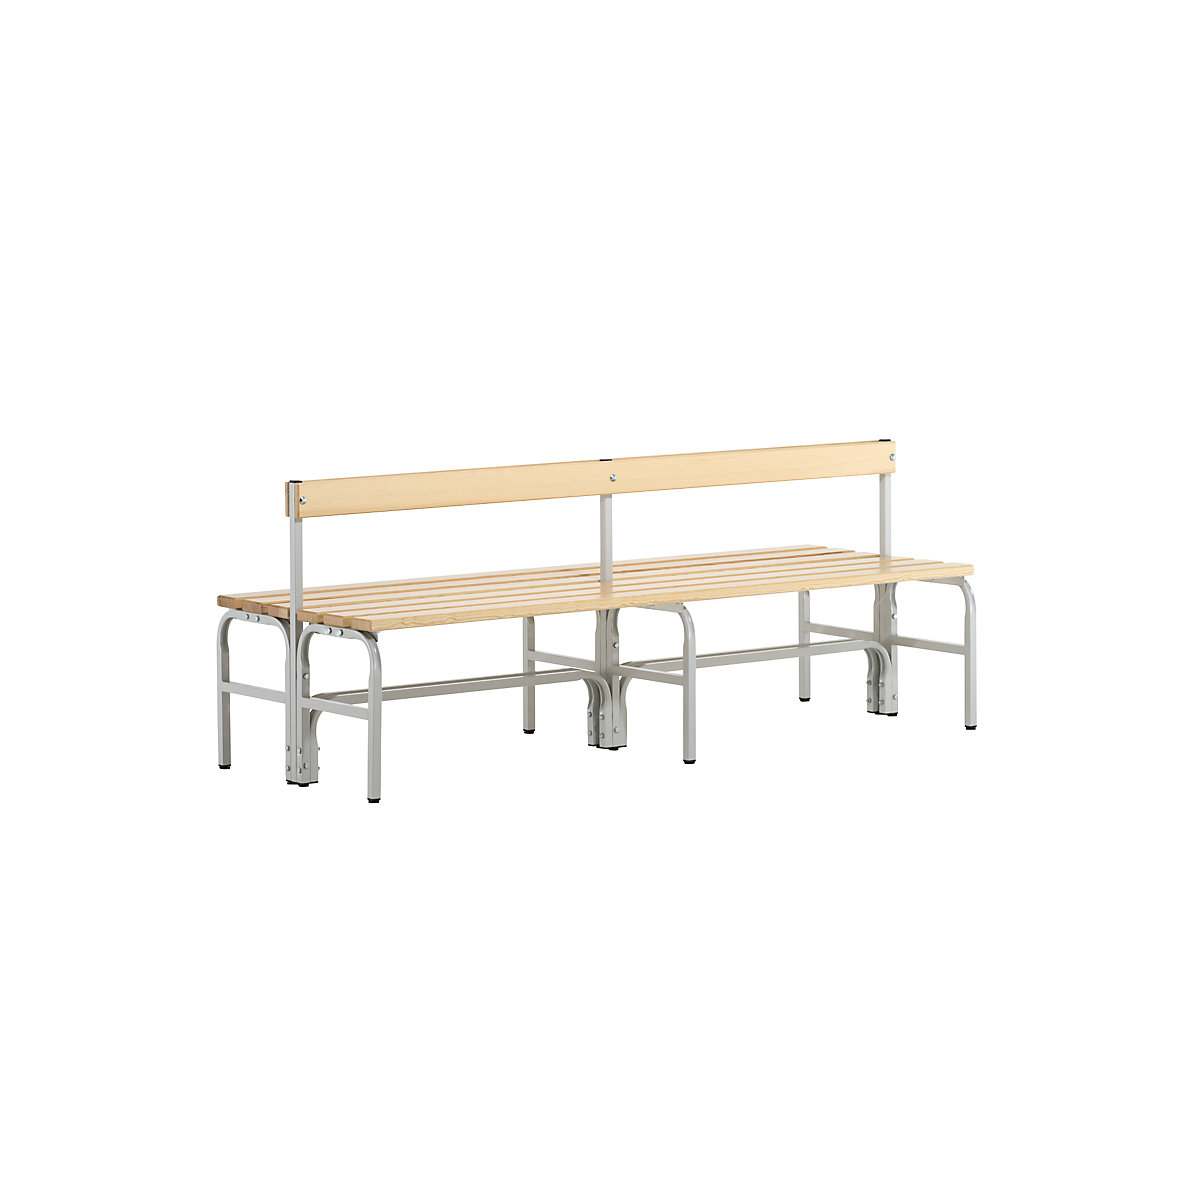 Half height cloakroom bench with back rest, double sided – Sypro, pine wood slats, length 1500 mm, light grey-5